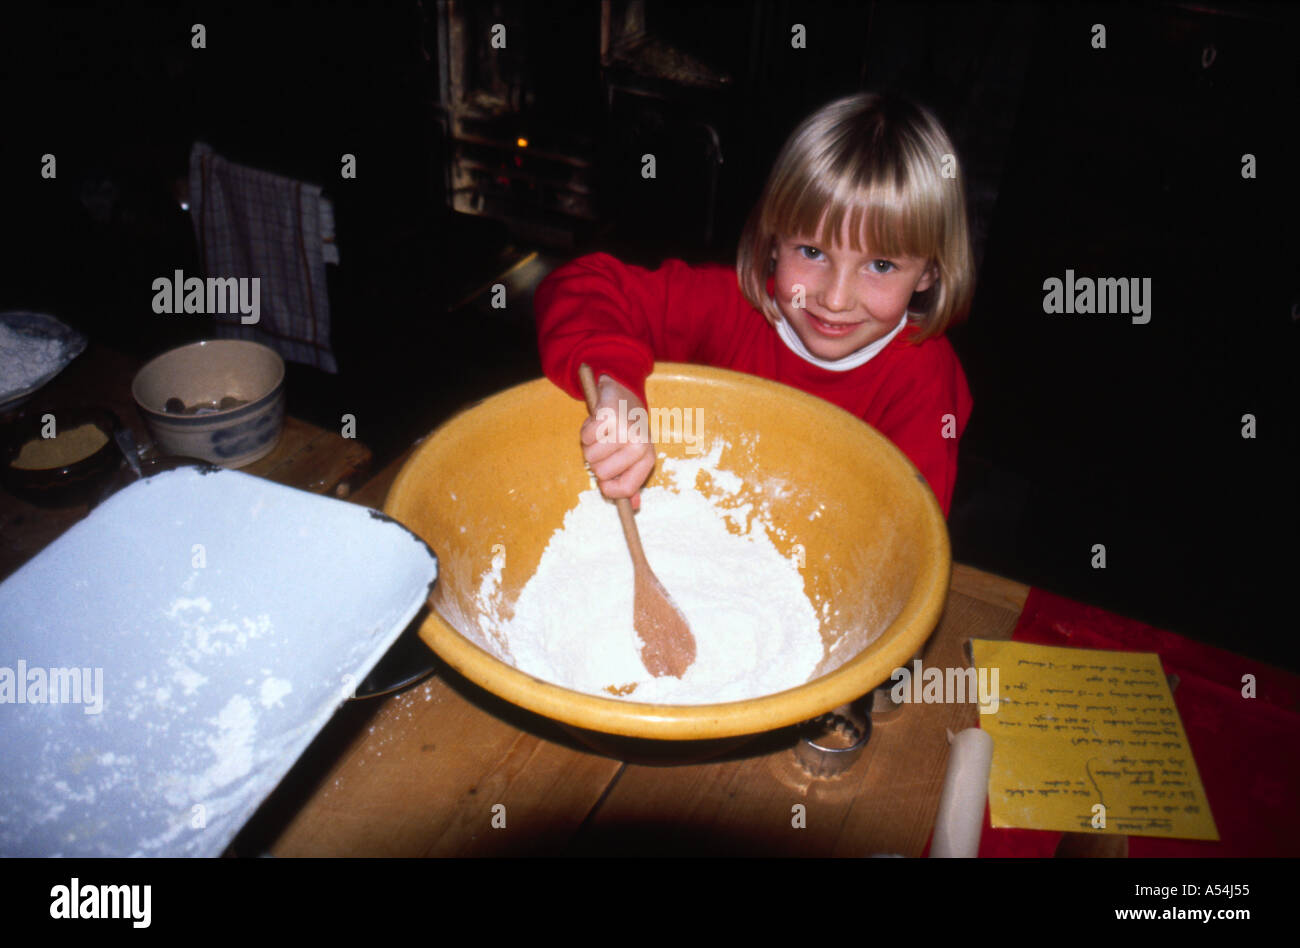 Girl helping with baking Stock Photo